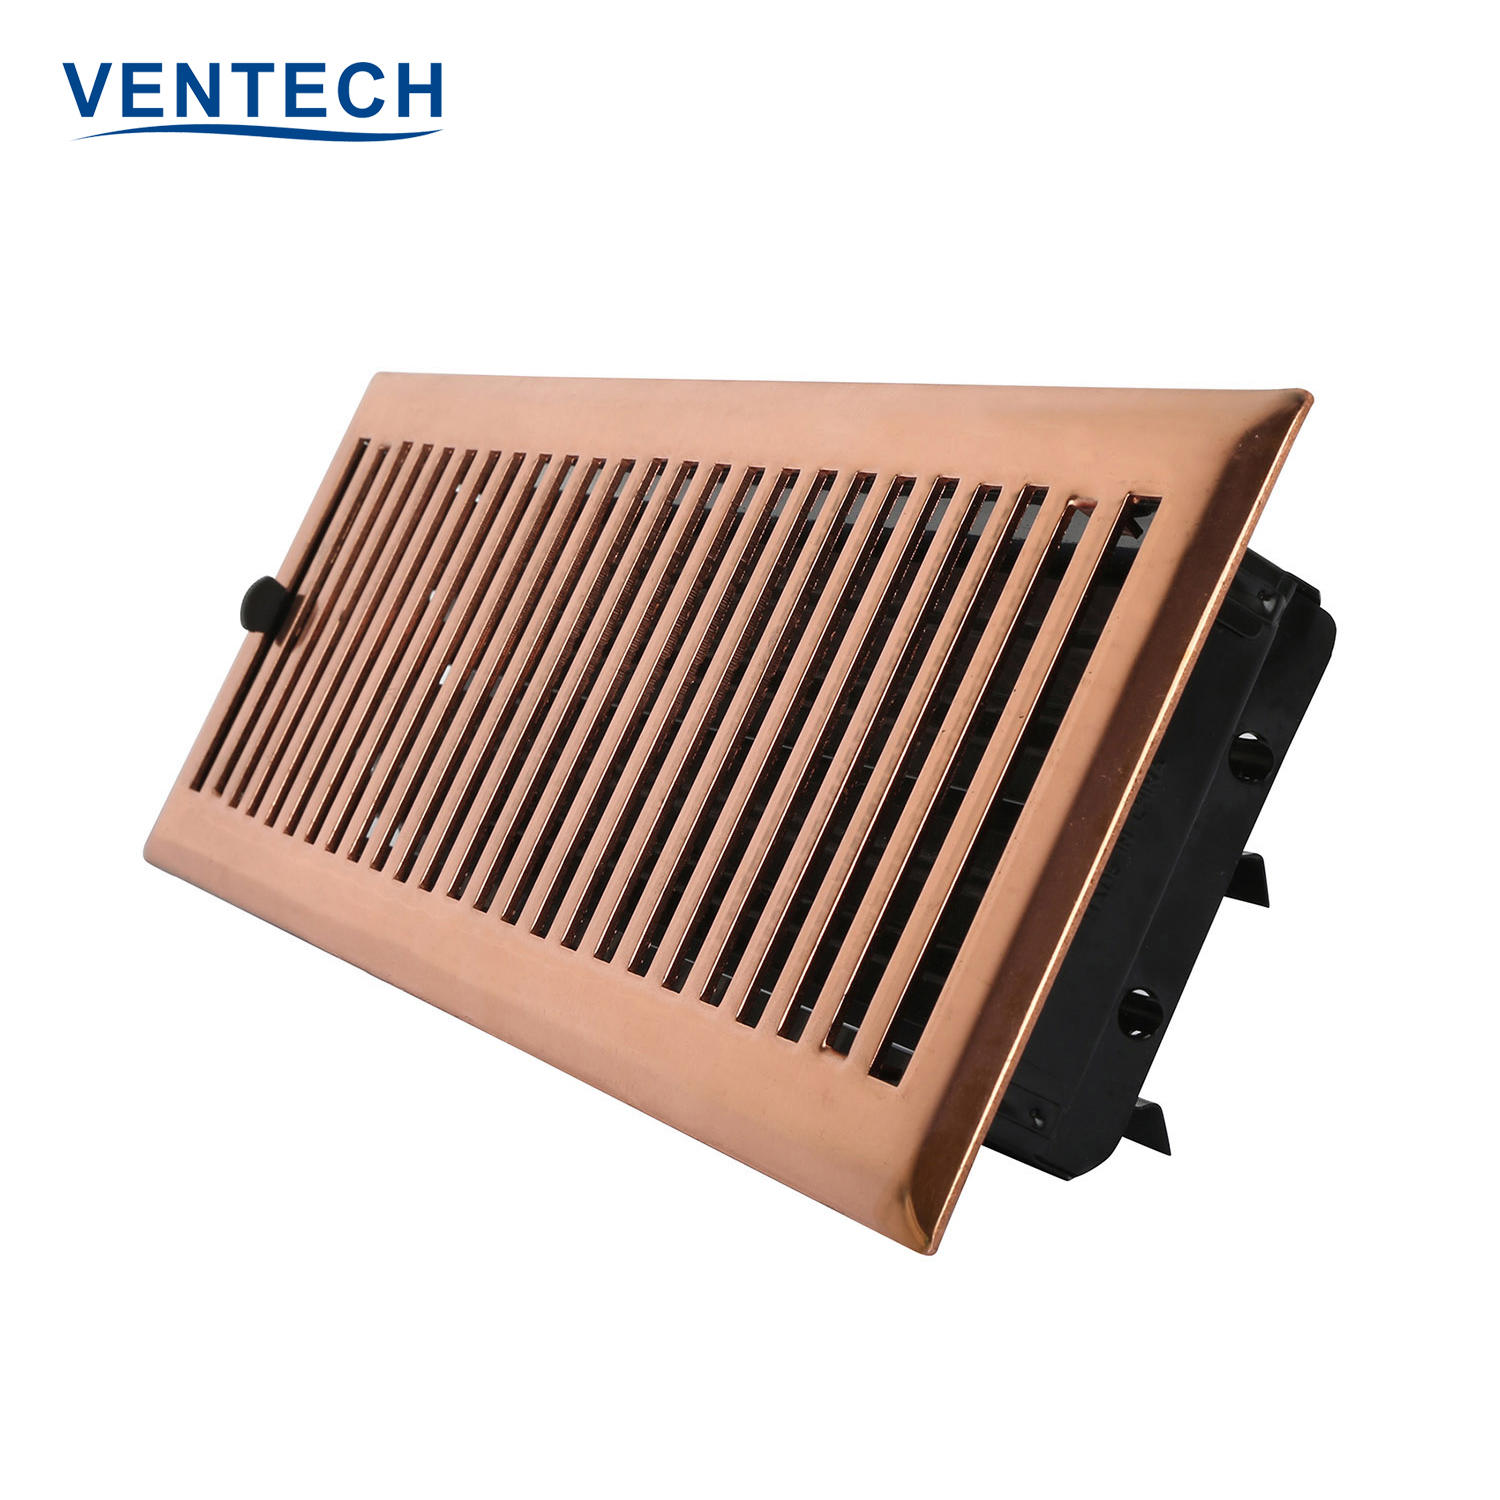 Hvac Exhaust Air Wall Vent Ventilation Supply Fresh Air Floor Grilles For Air Conditioners